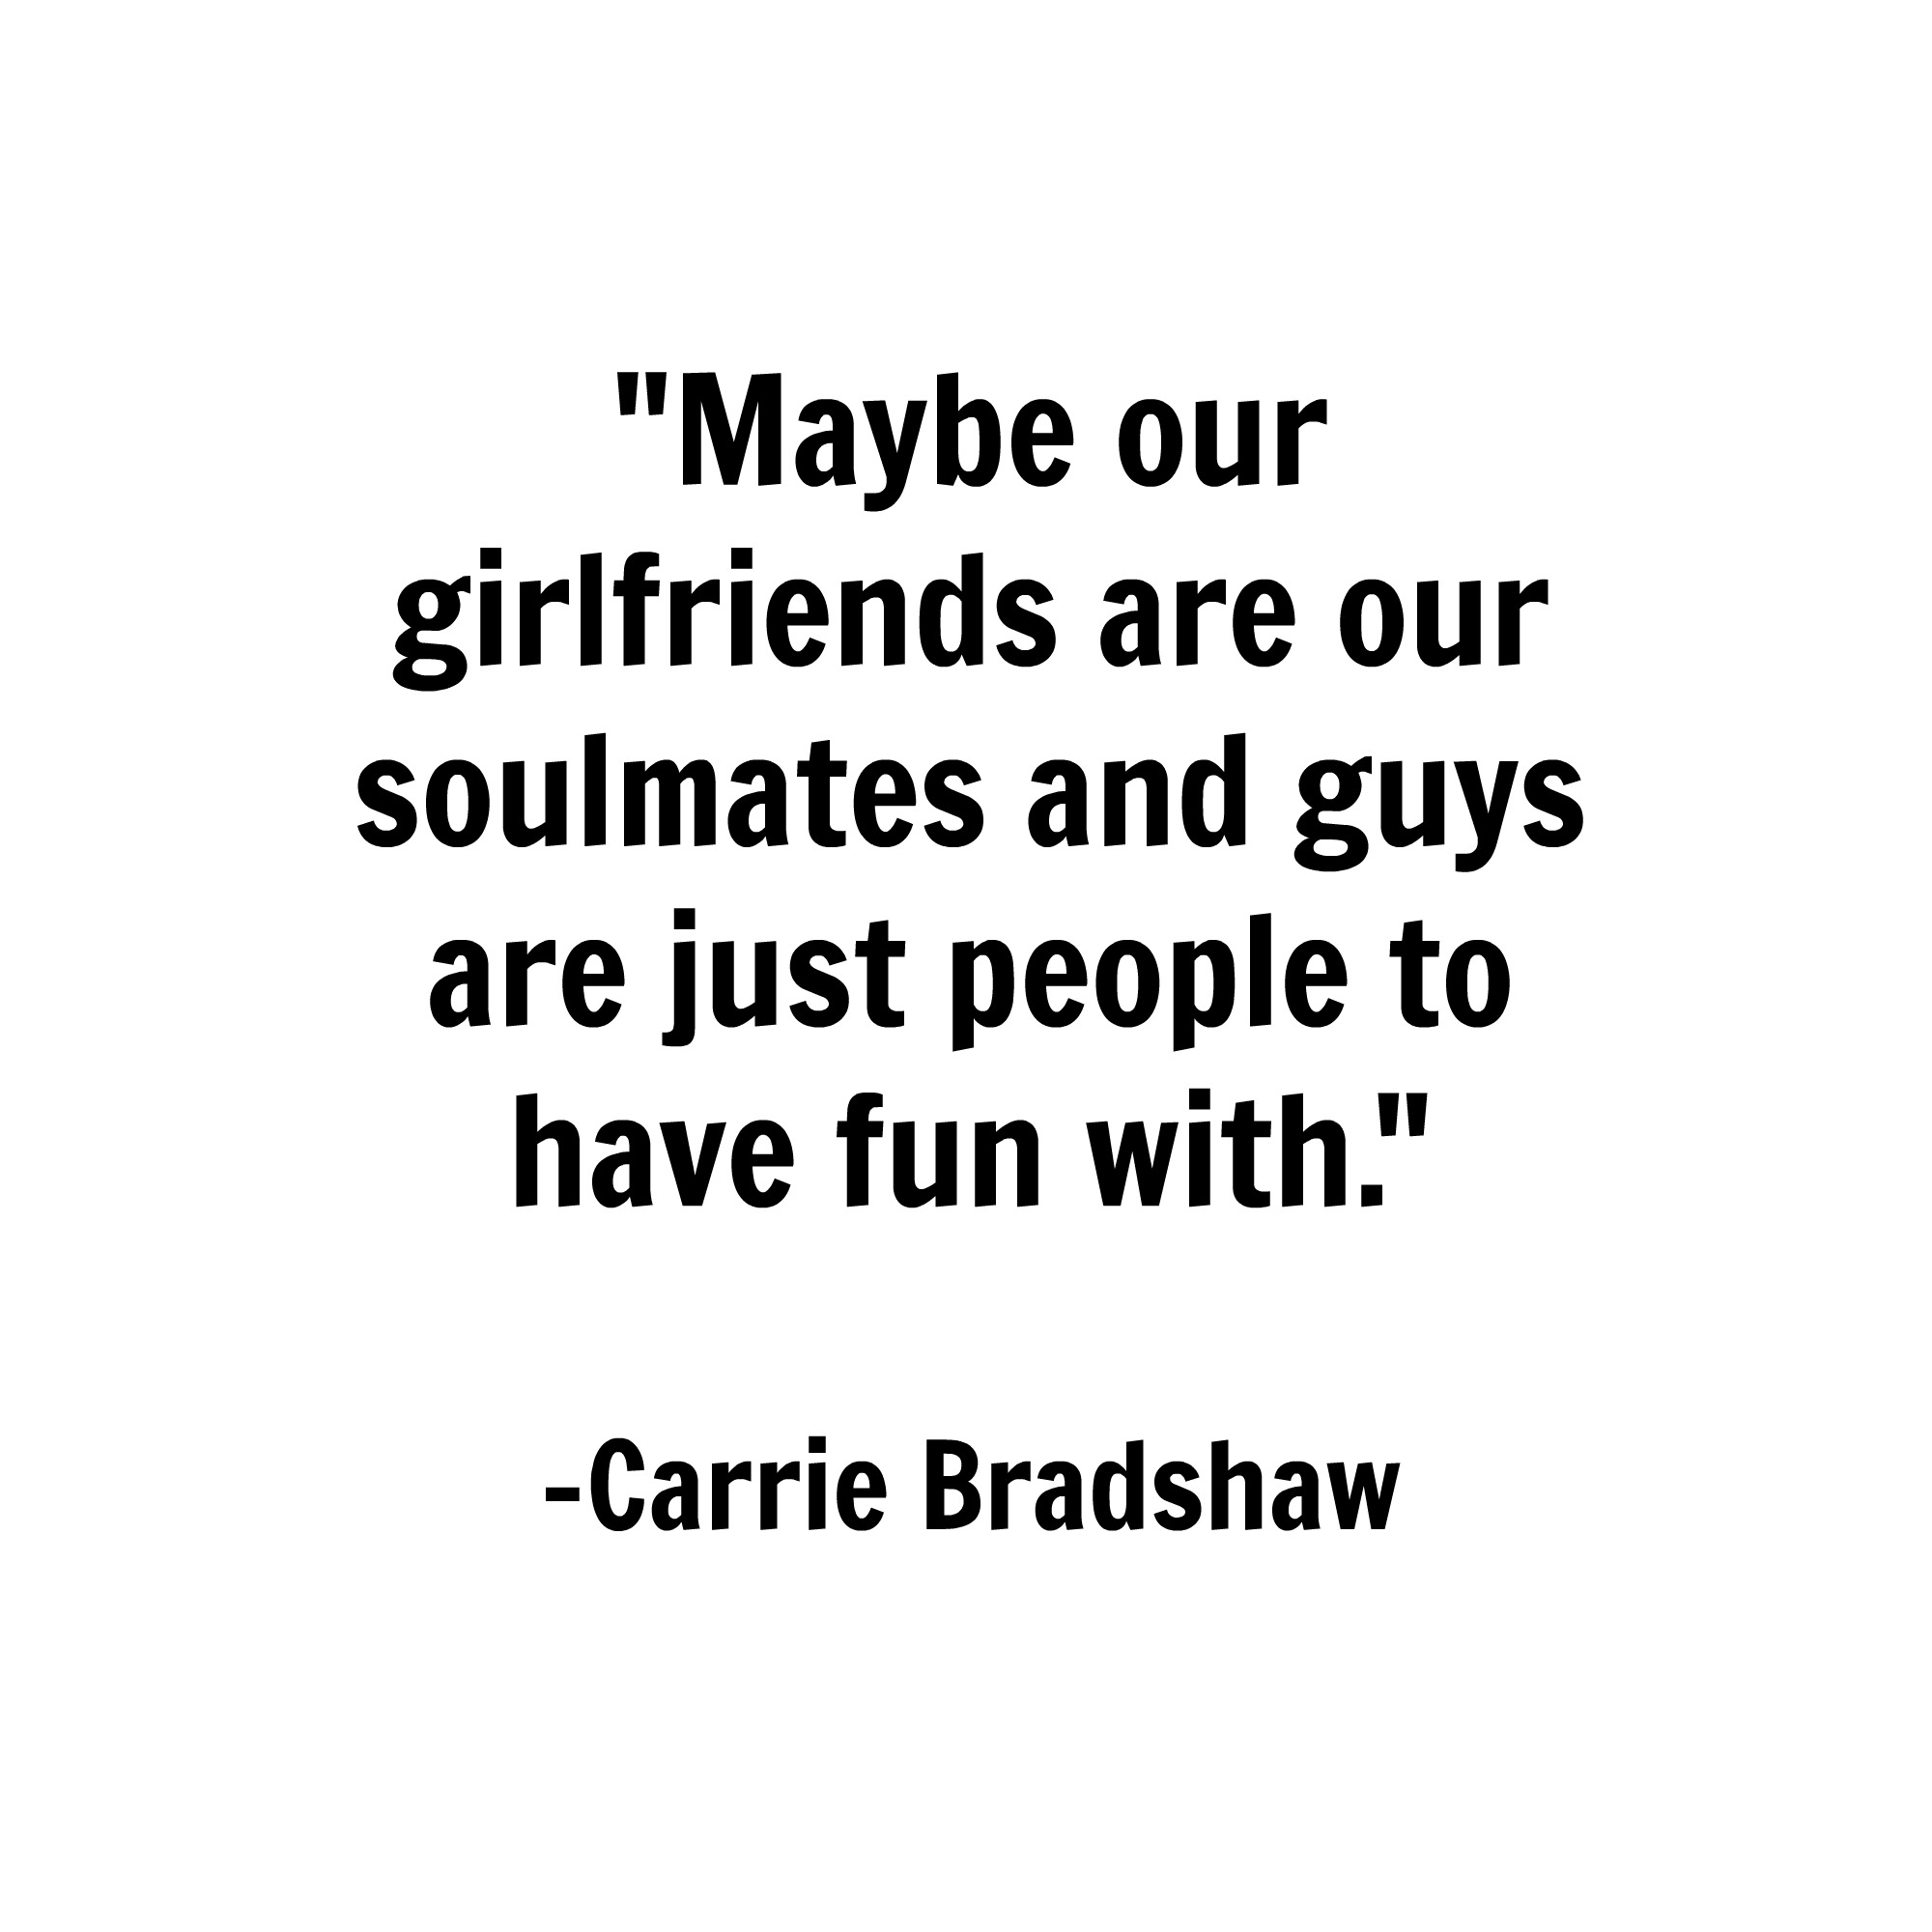 carrie-bradshaw-quote